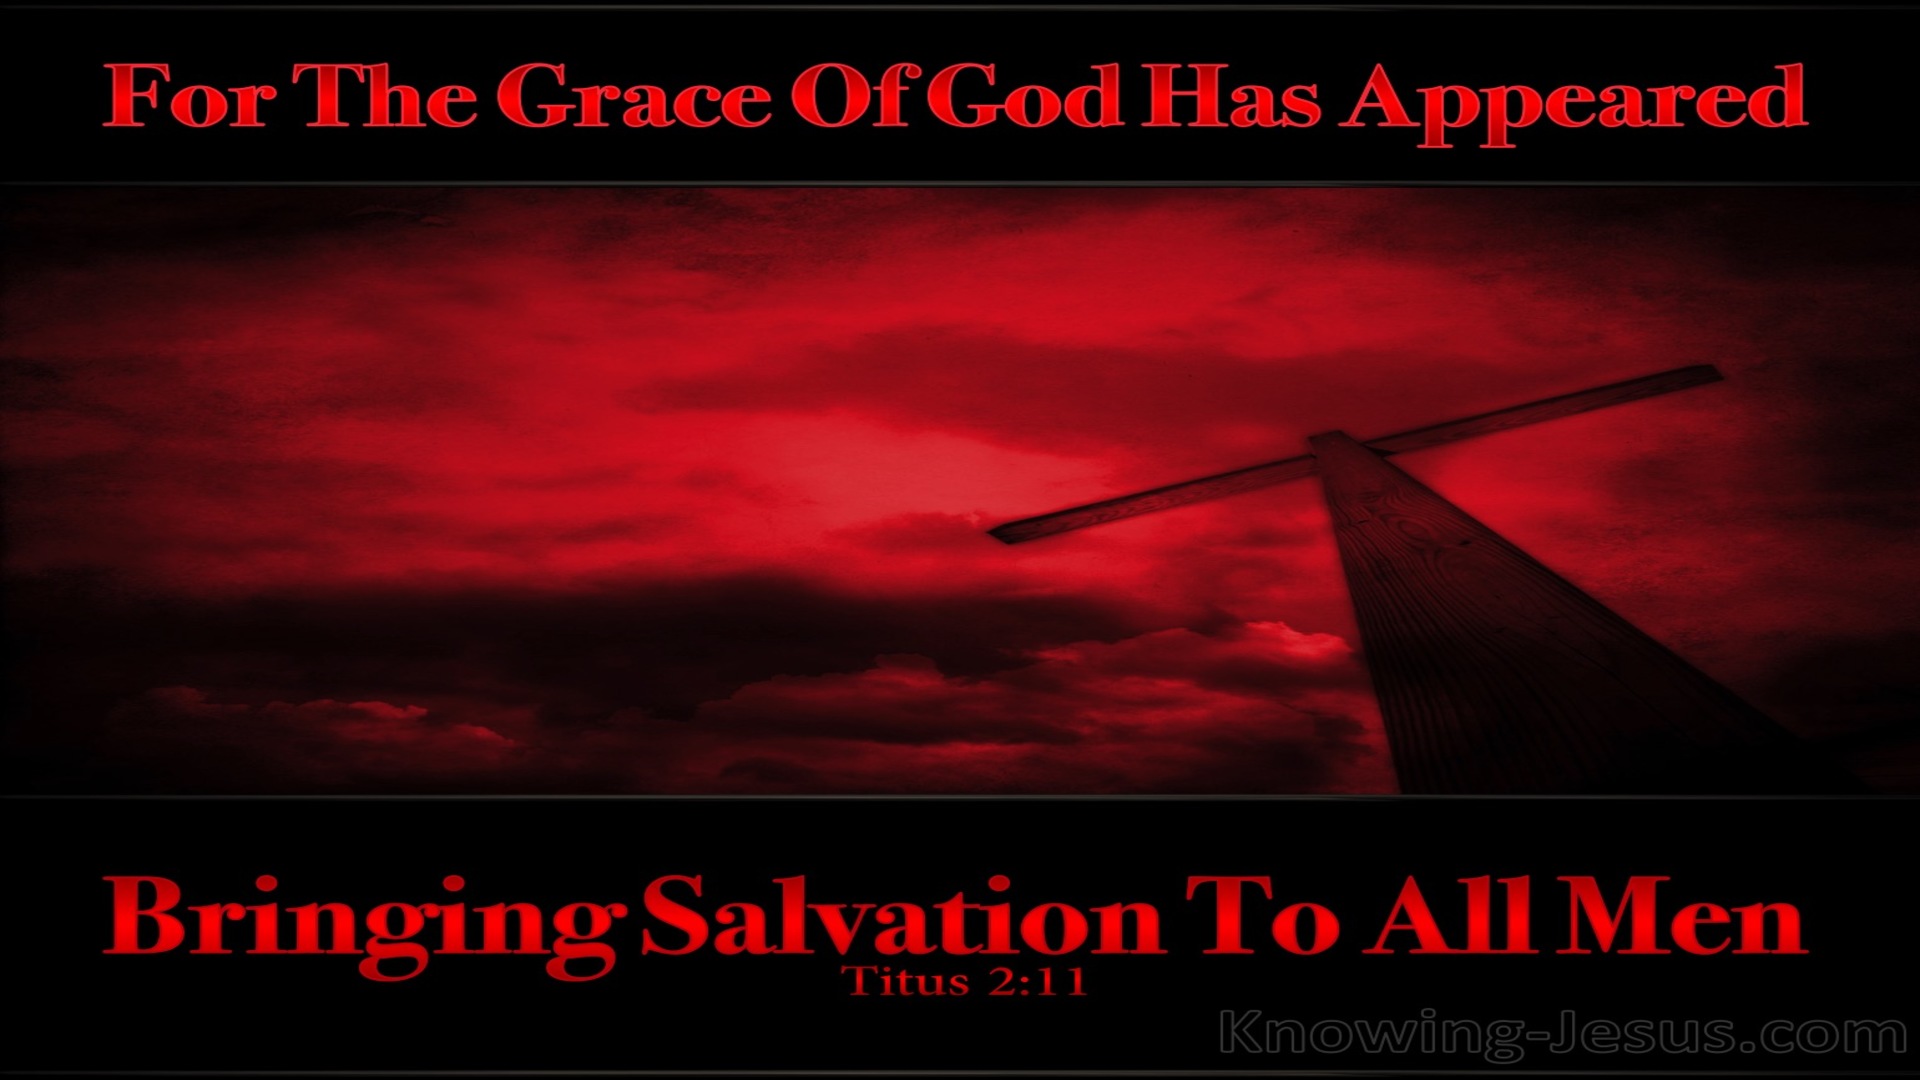 Titus 2:11 The Much:More Grace of God (devotional)12:29   (red)